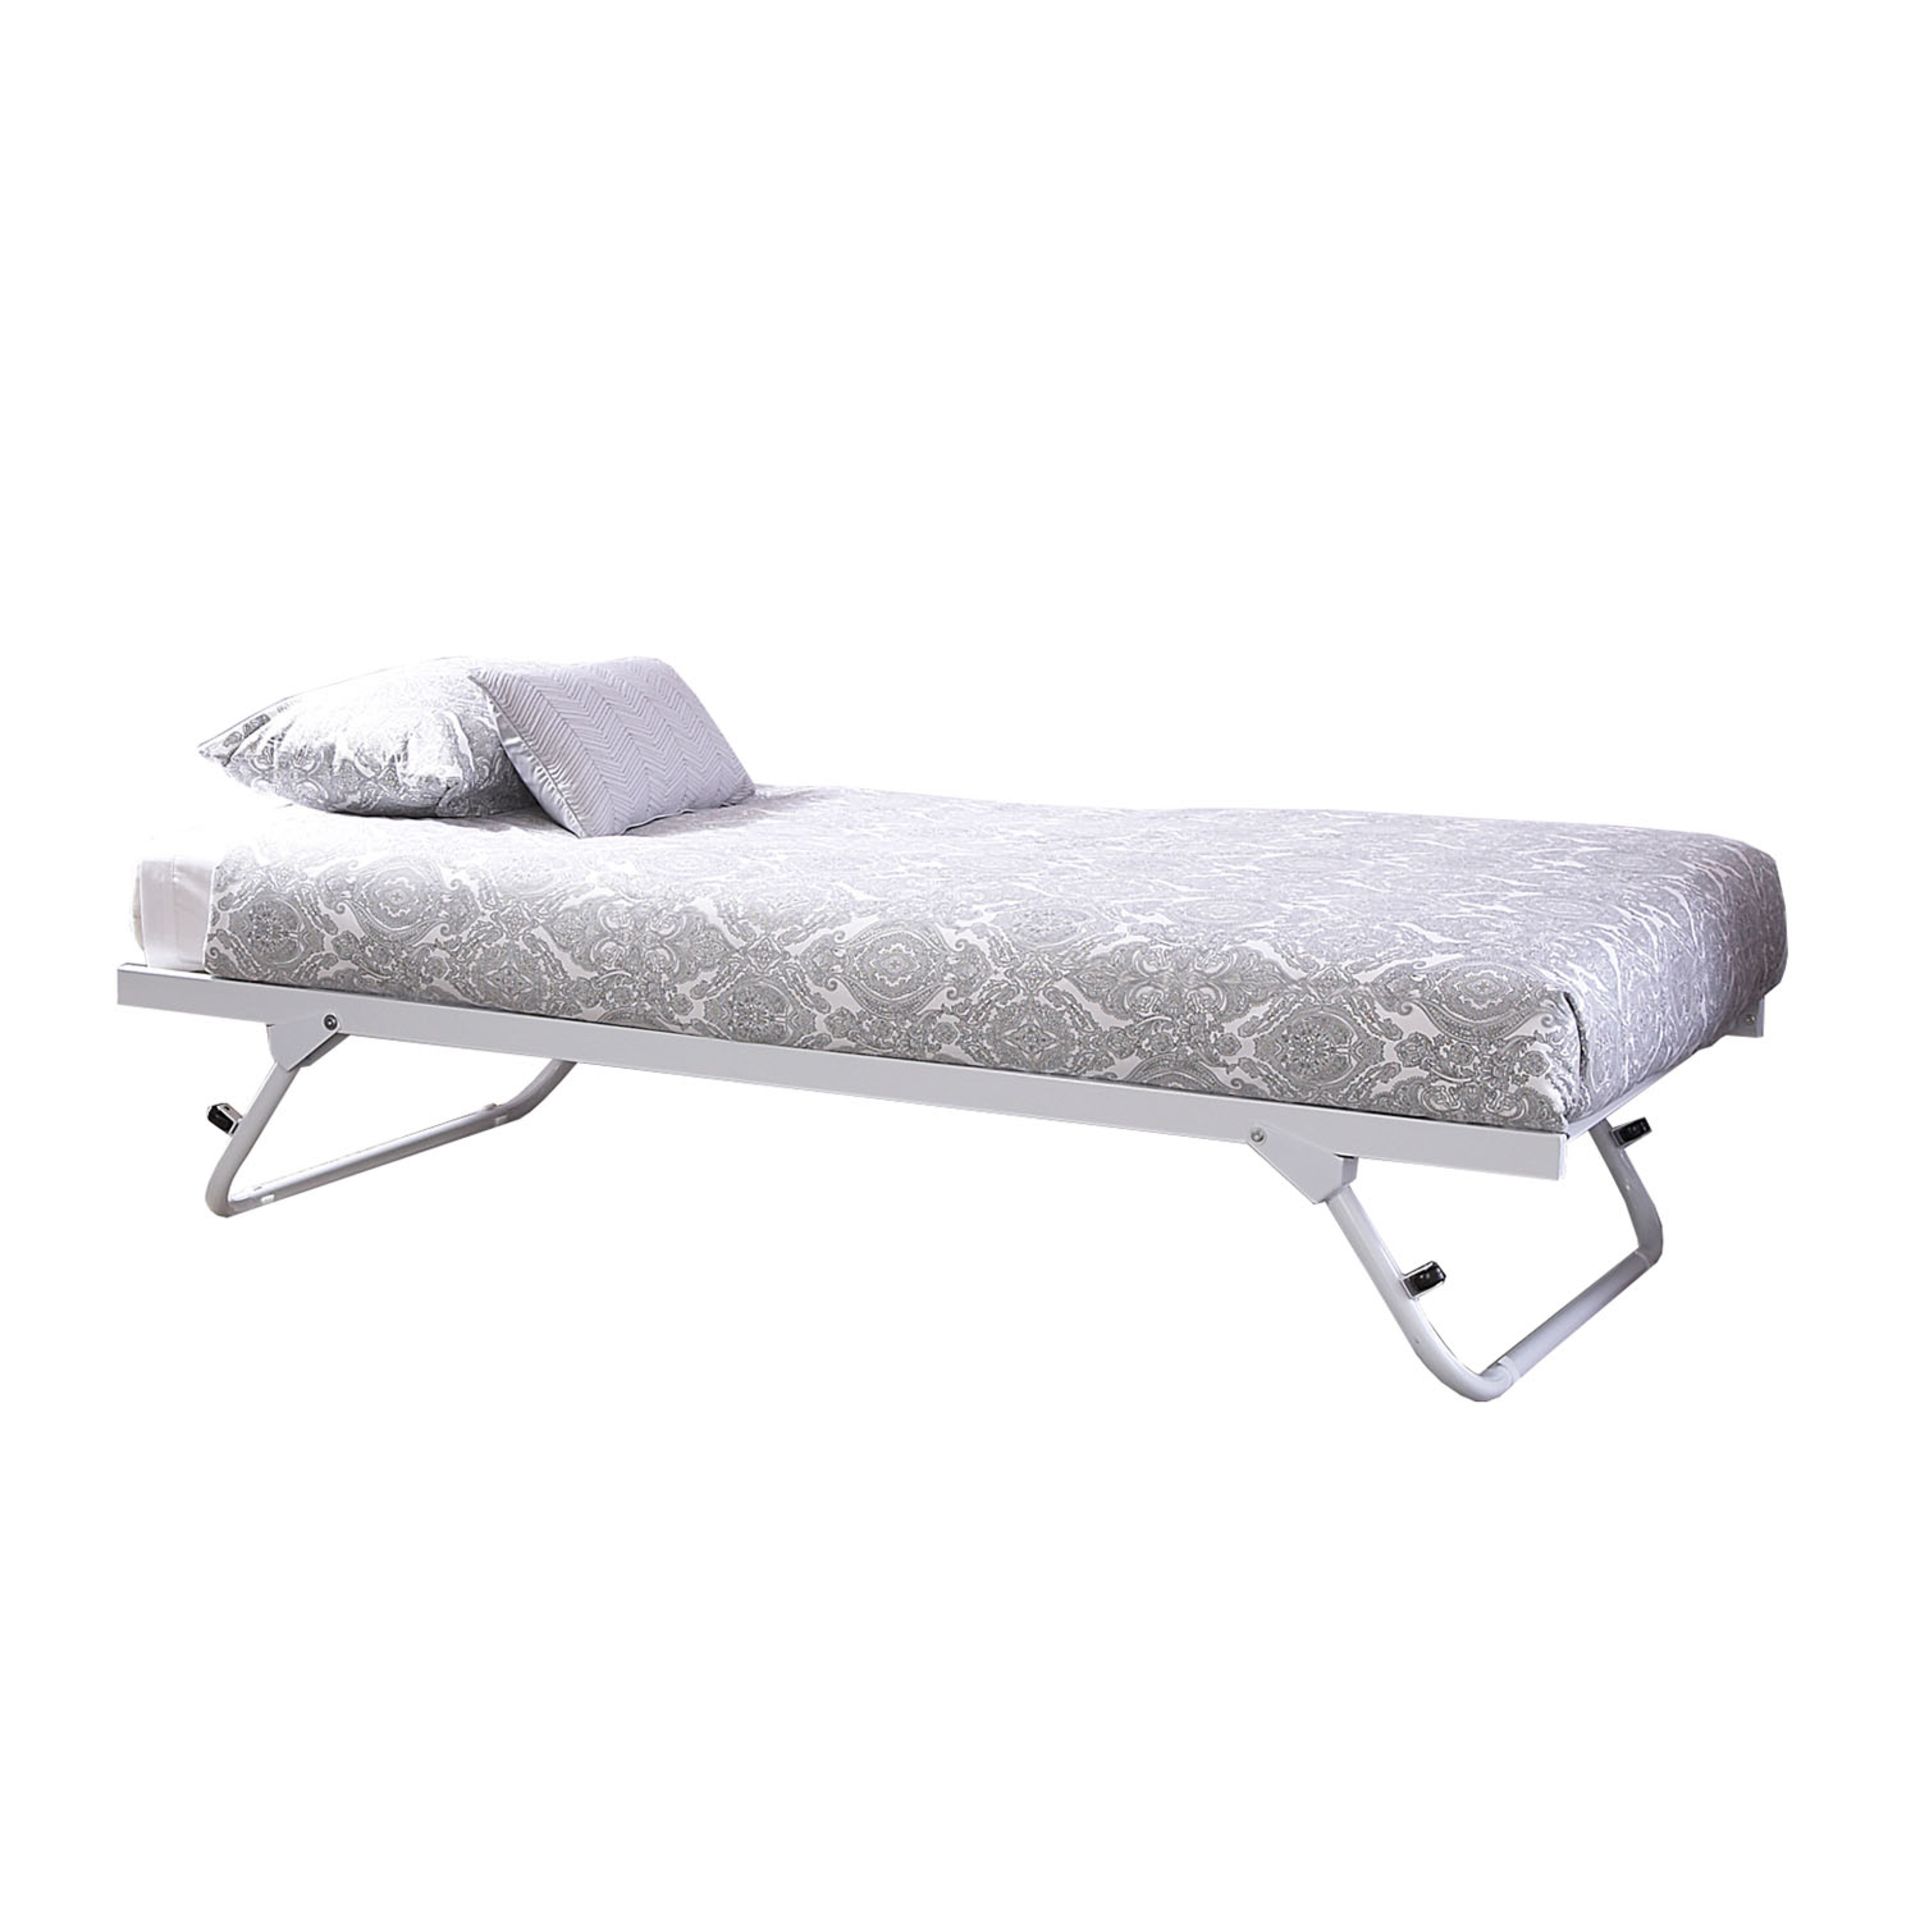 1 BOXED 3FT MADISON TRUNDLE BED IN WHITE (SINGLE)